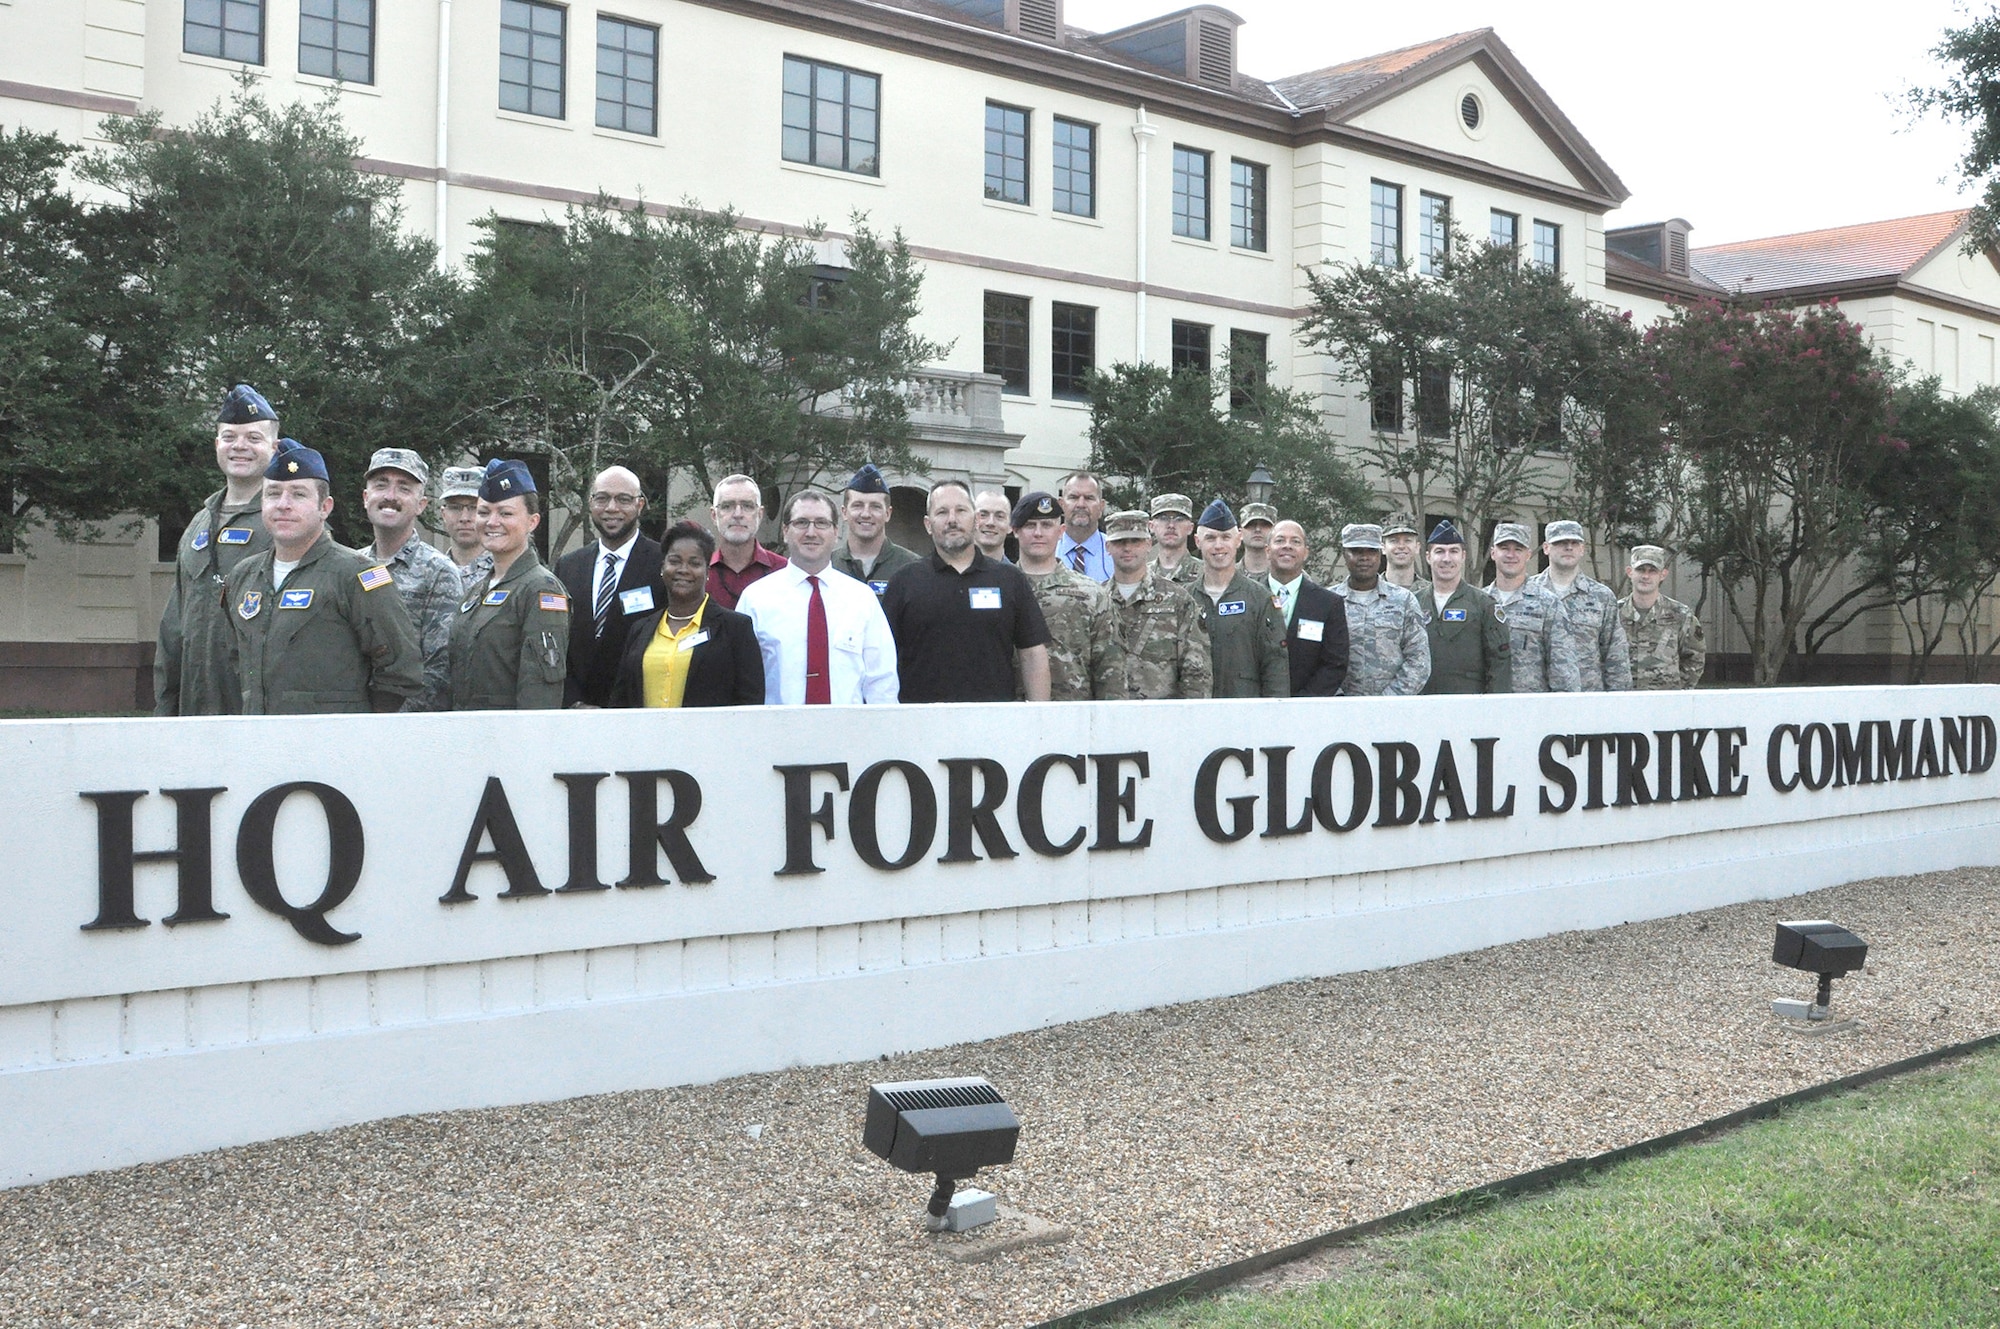 Newly-selected participants in Air Force Global Strike Command professional development programs recently came to Barksdale Air Force Base, La., for a three-day orientation, where they met with senior leadership and functional managers, and received general information about their programs. They also spent two days in a Leadership Enhancement Course.